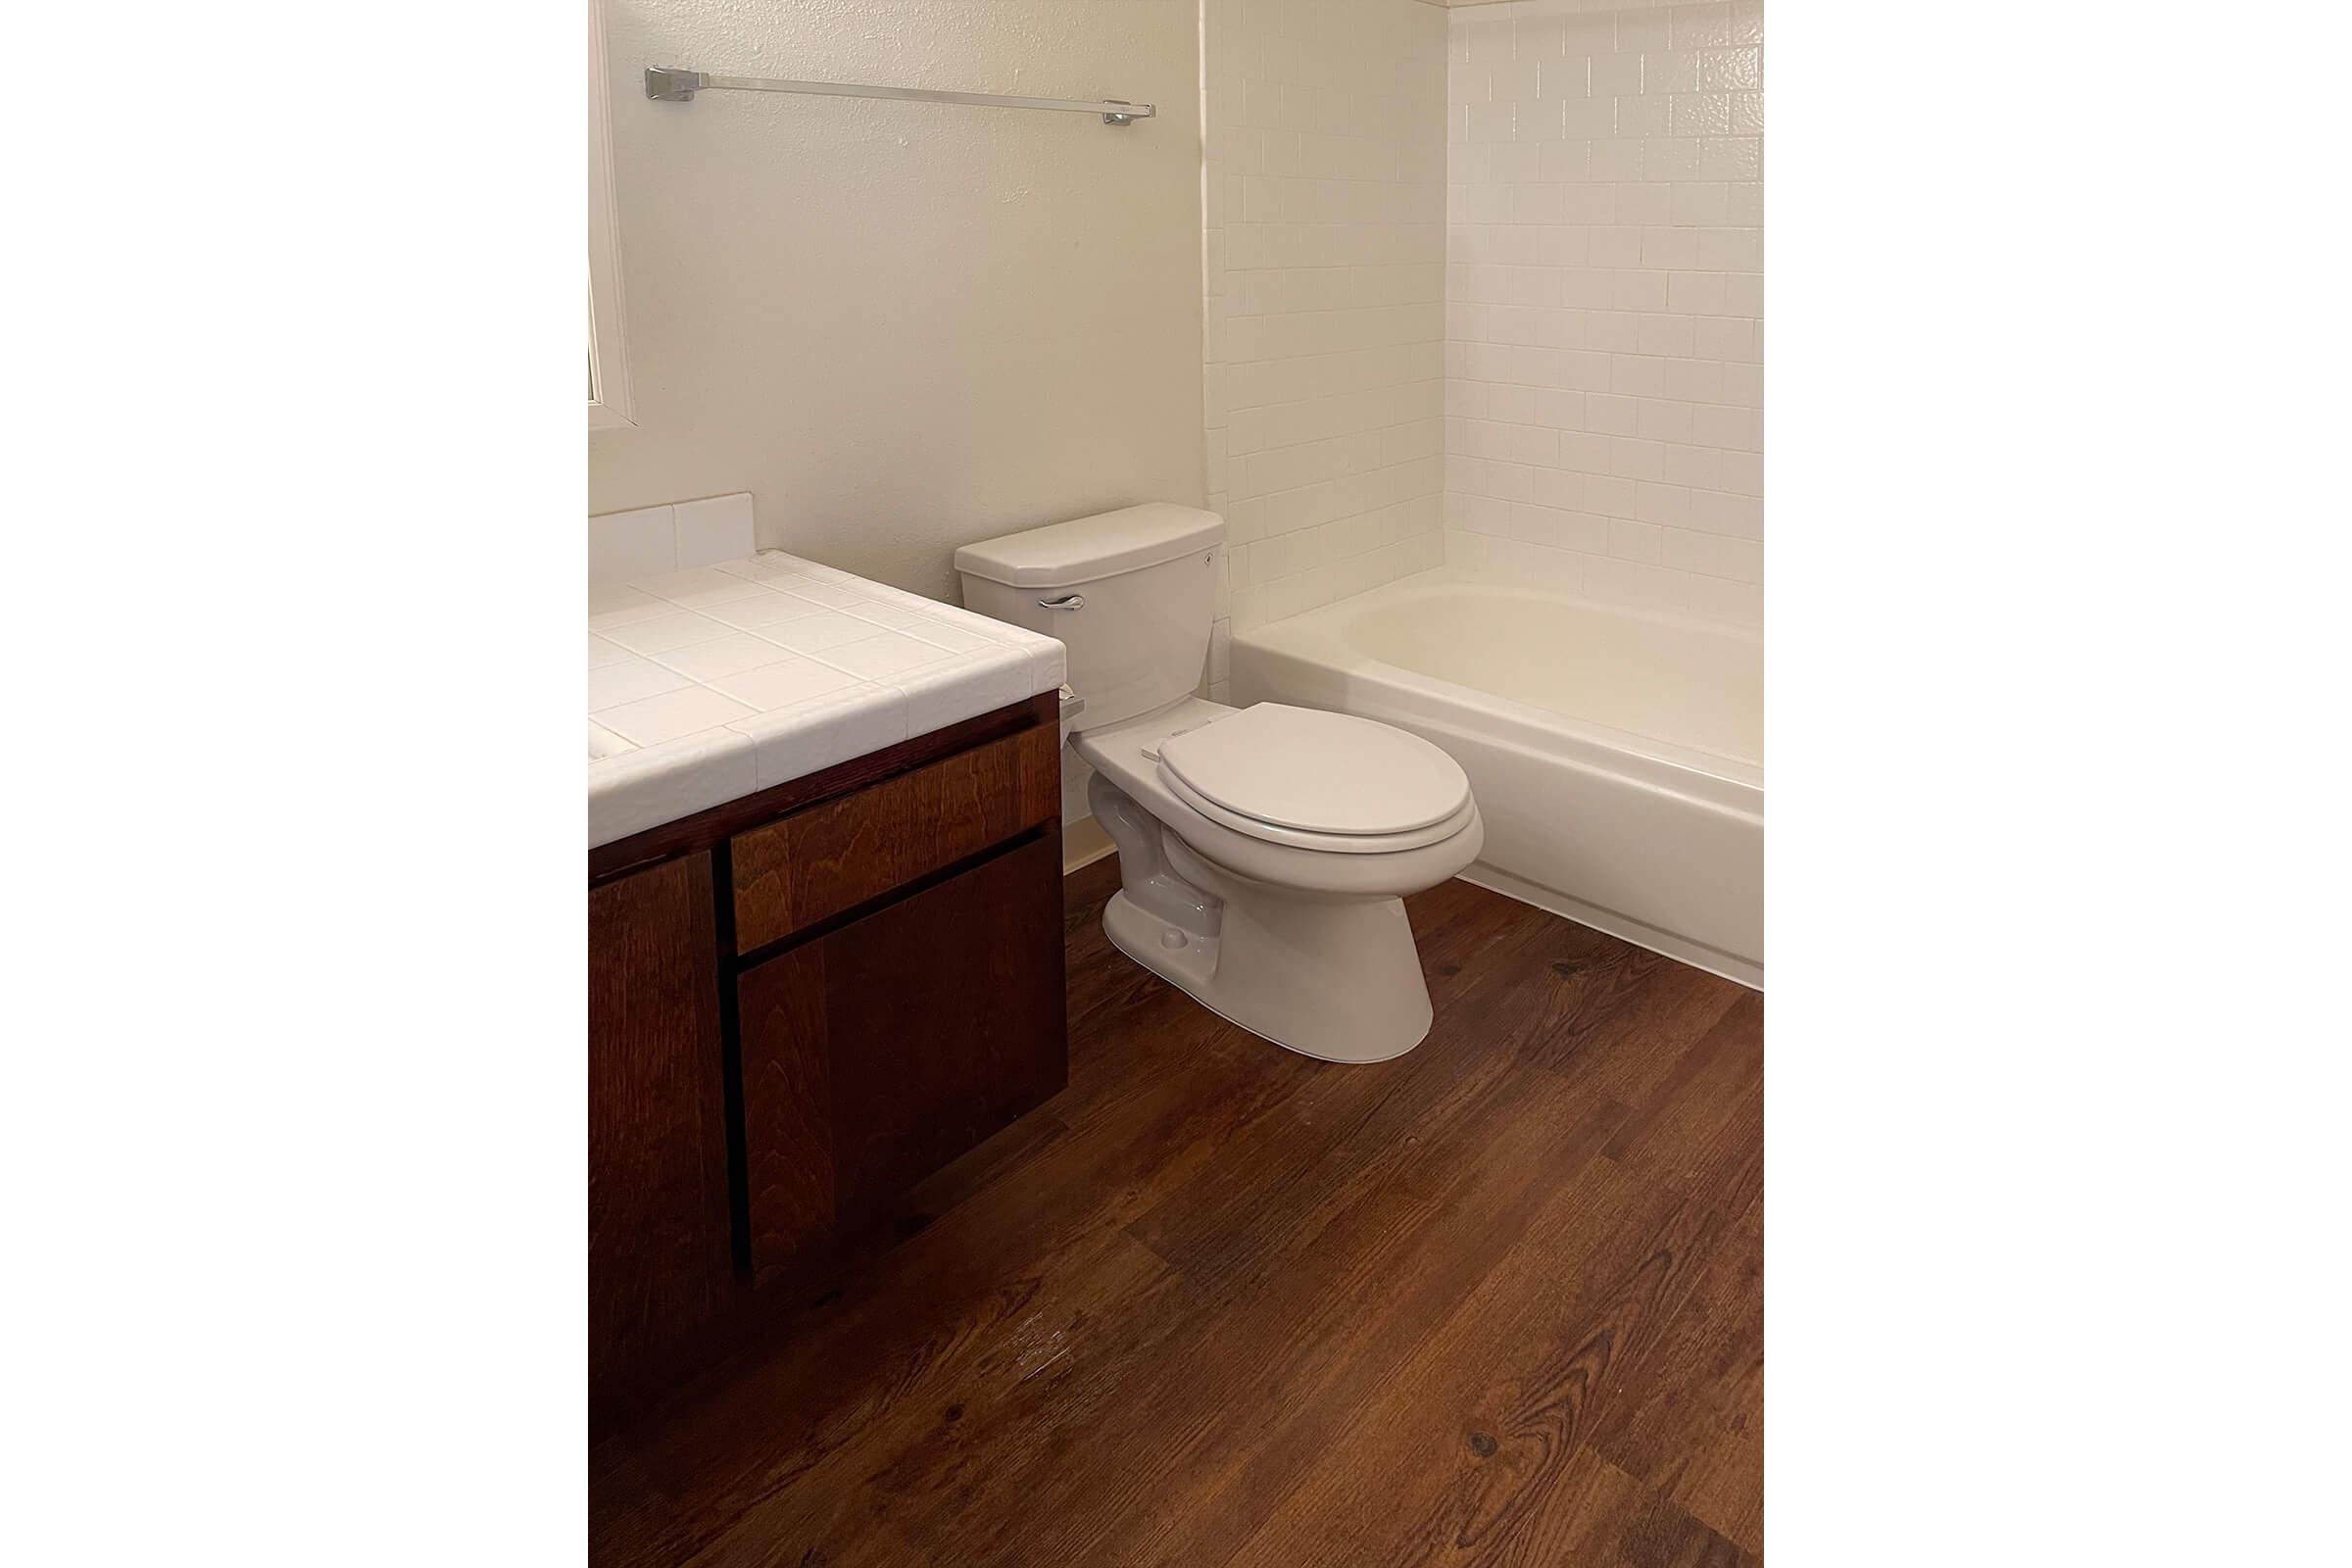 Vacant bathroom with wooden floors